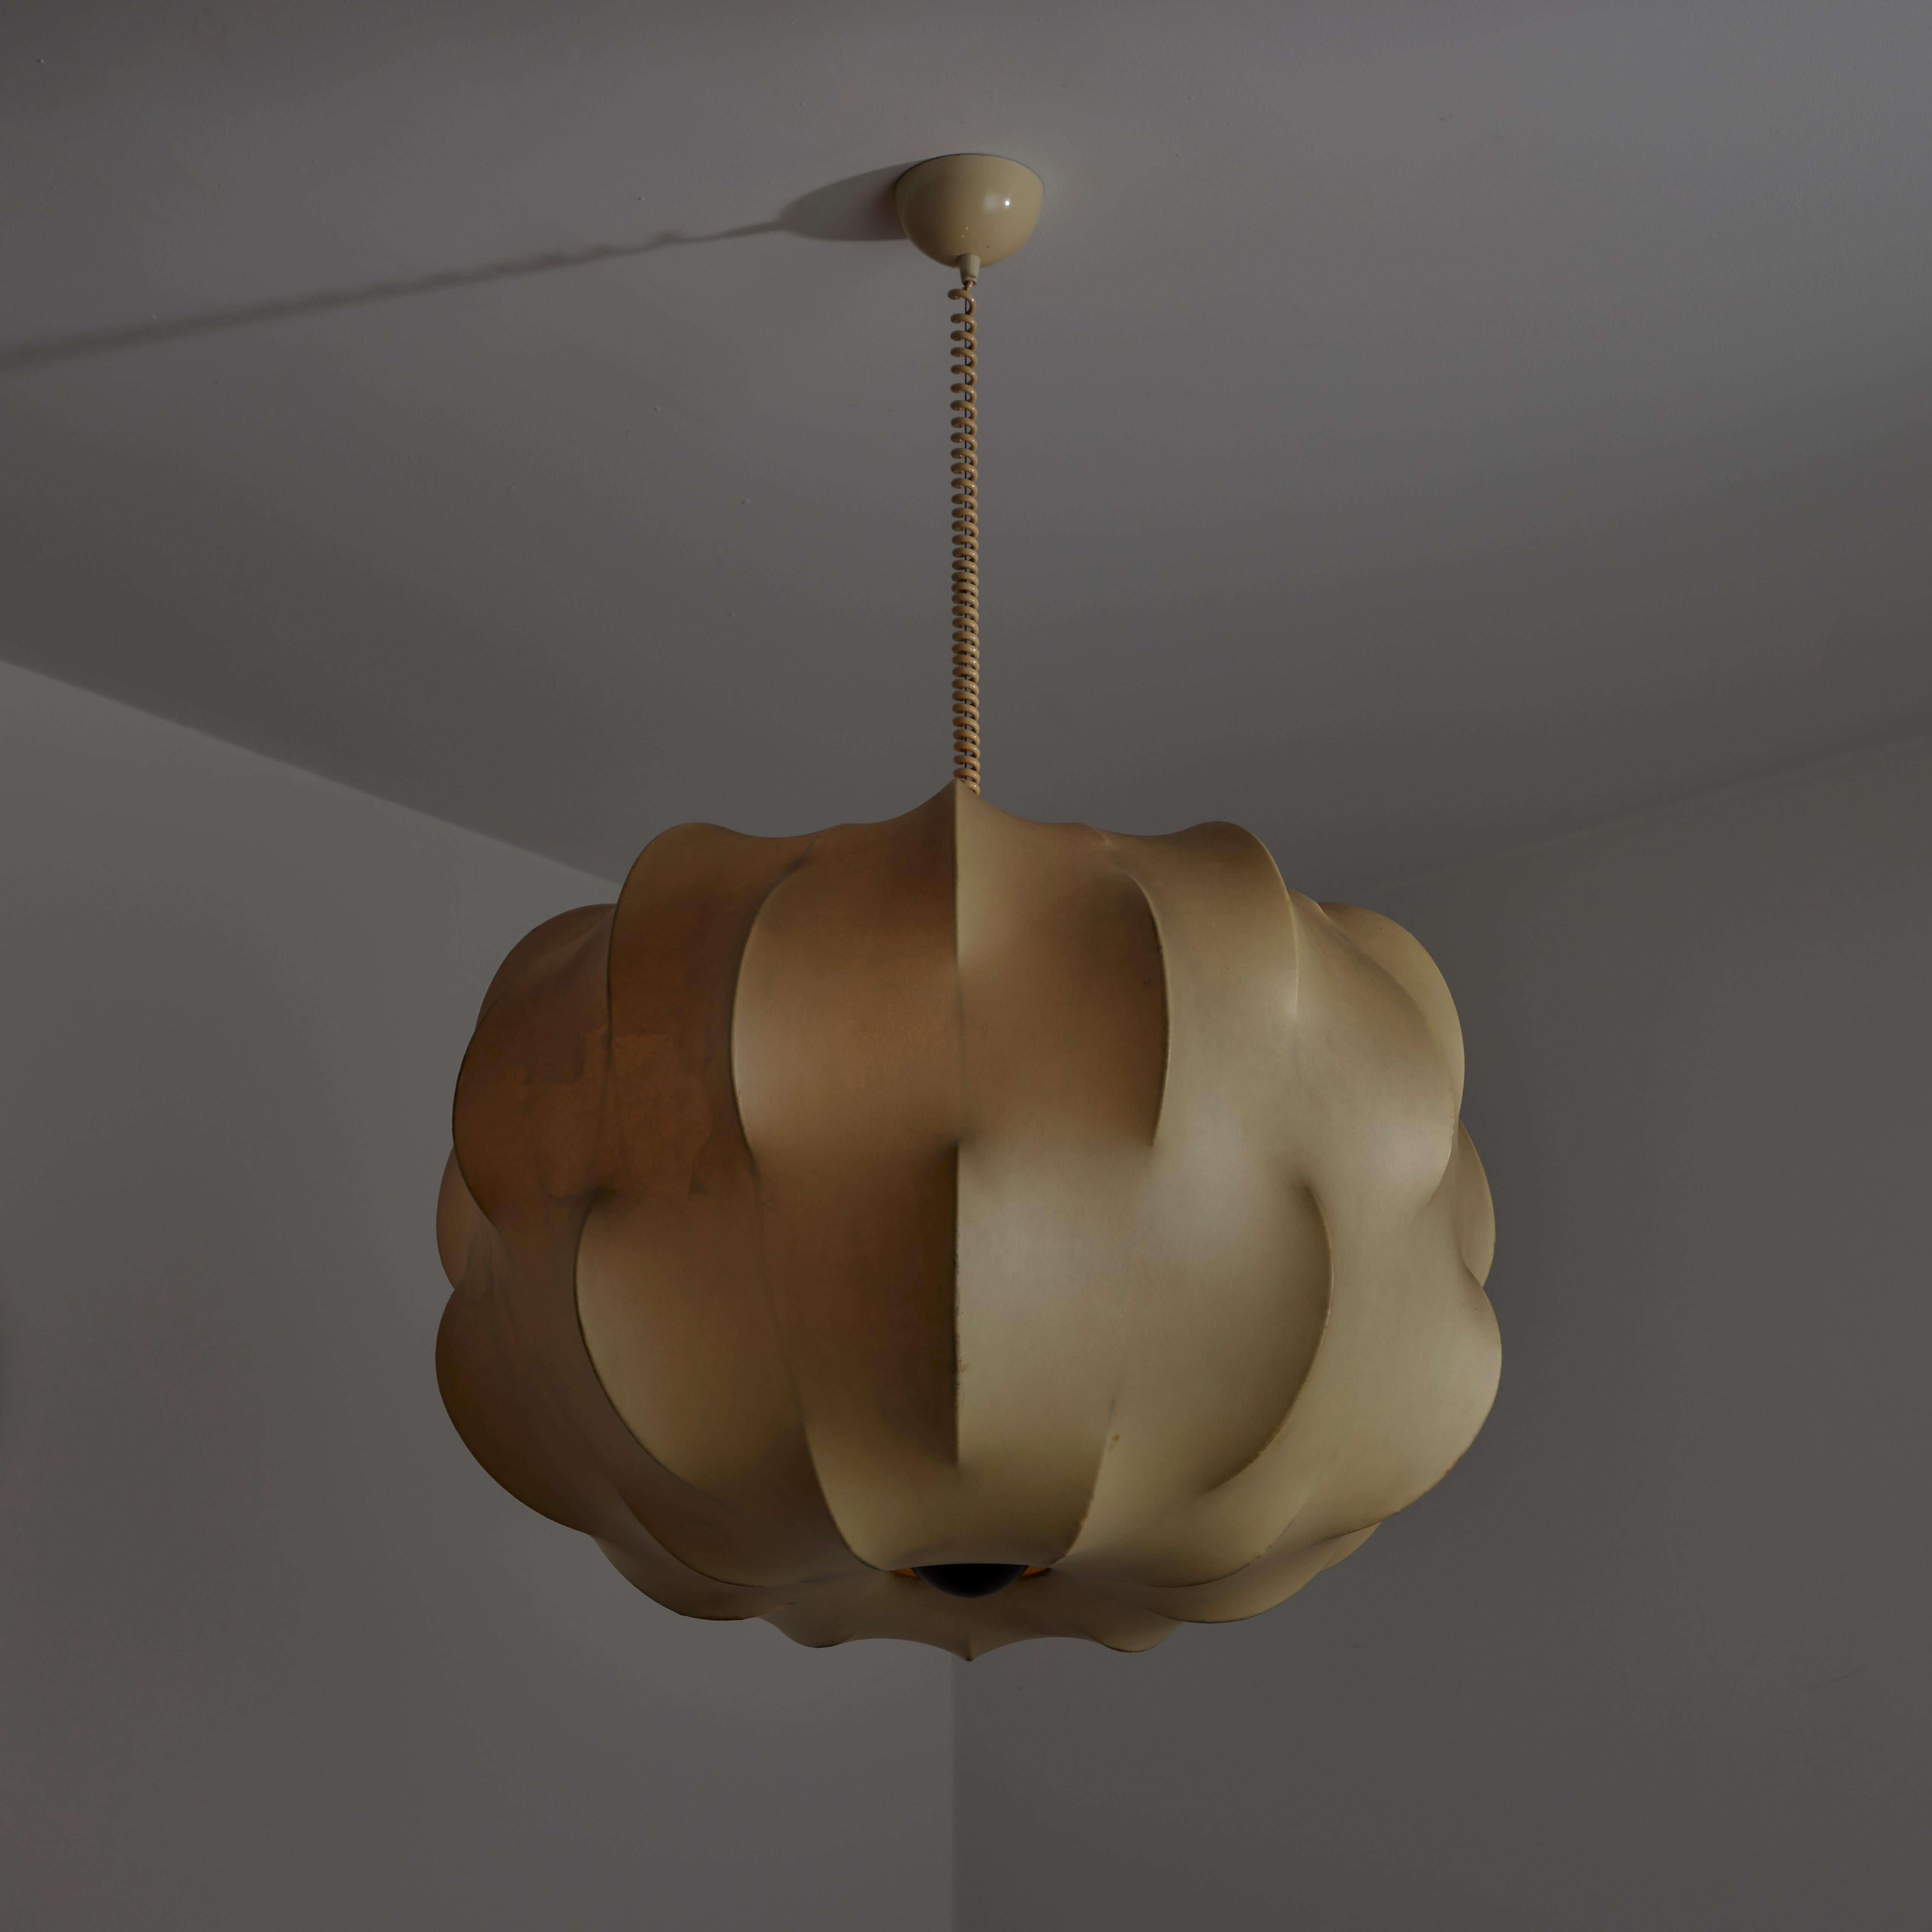 Enameled Rare 'Nuvola' Suspension Light by Tobia Scarpa for Flos